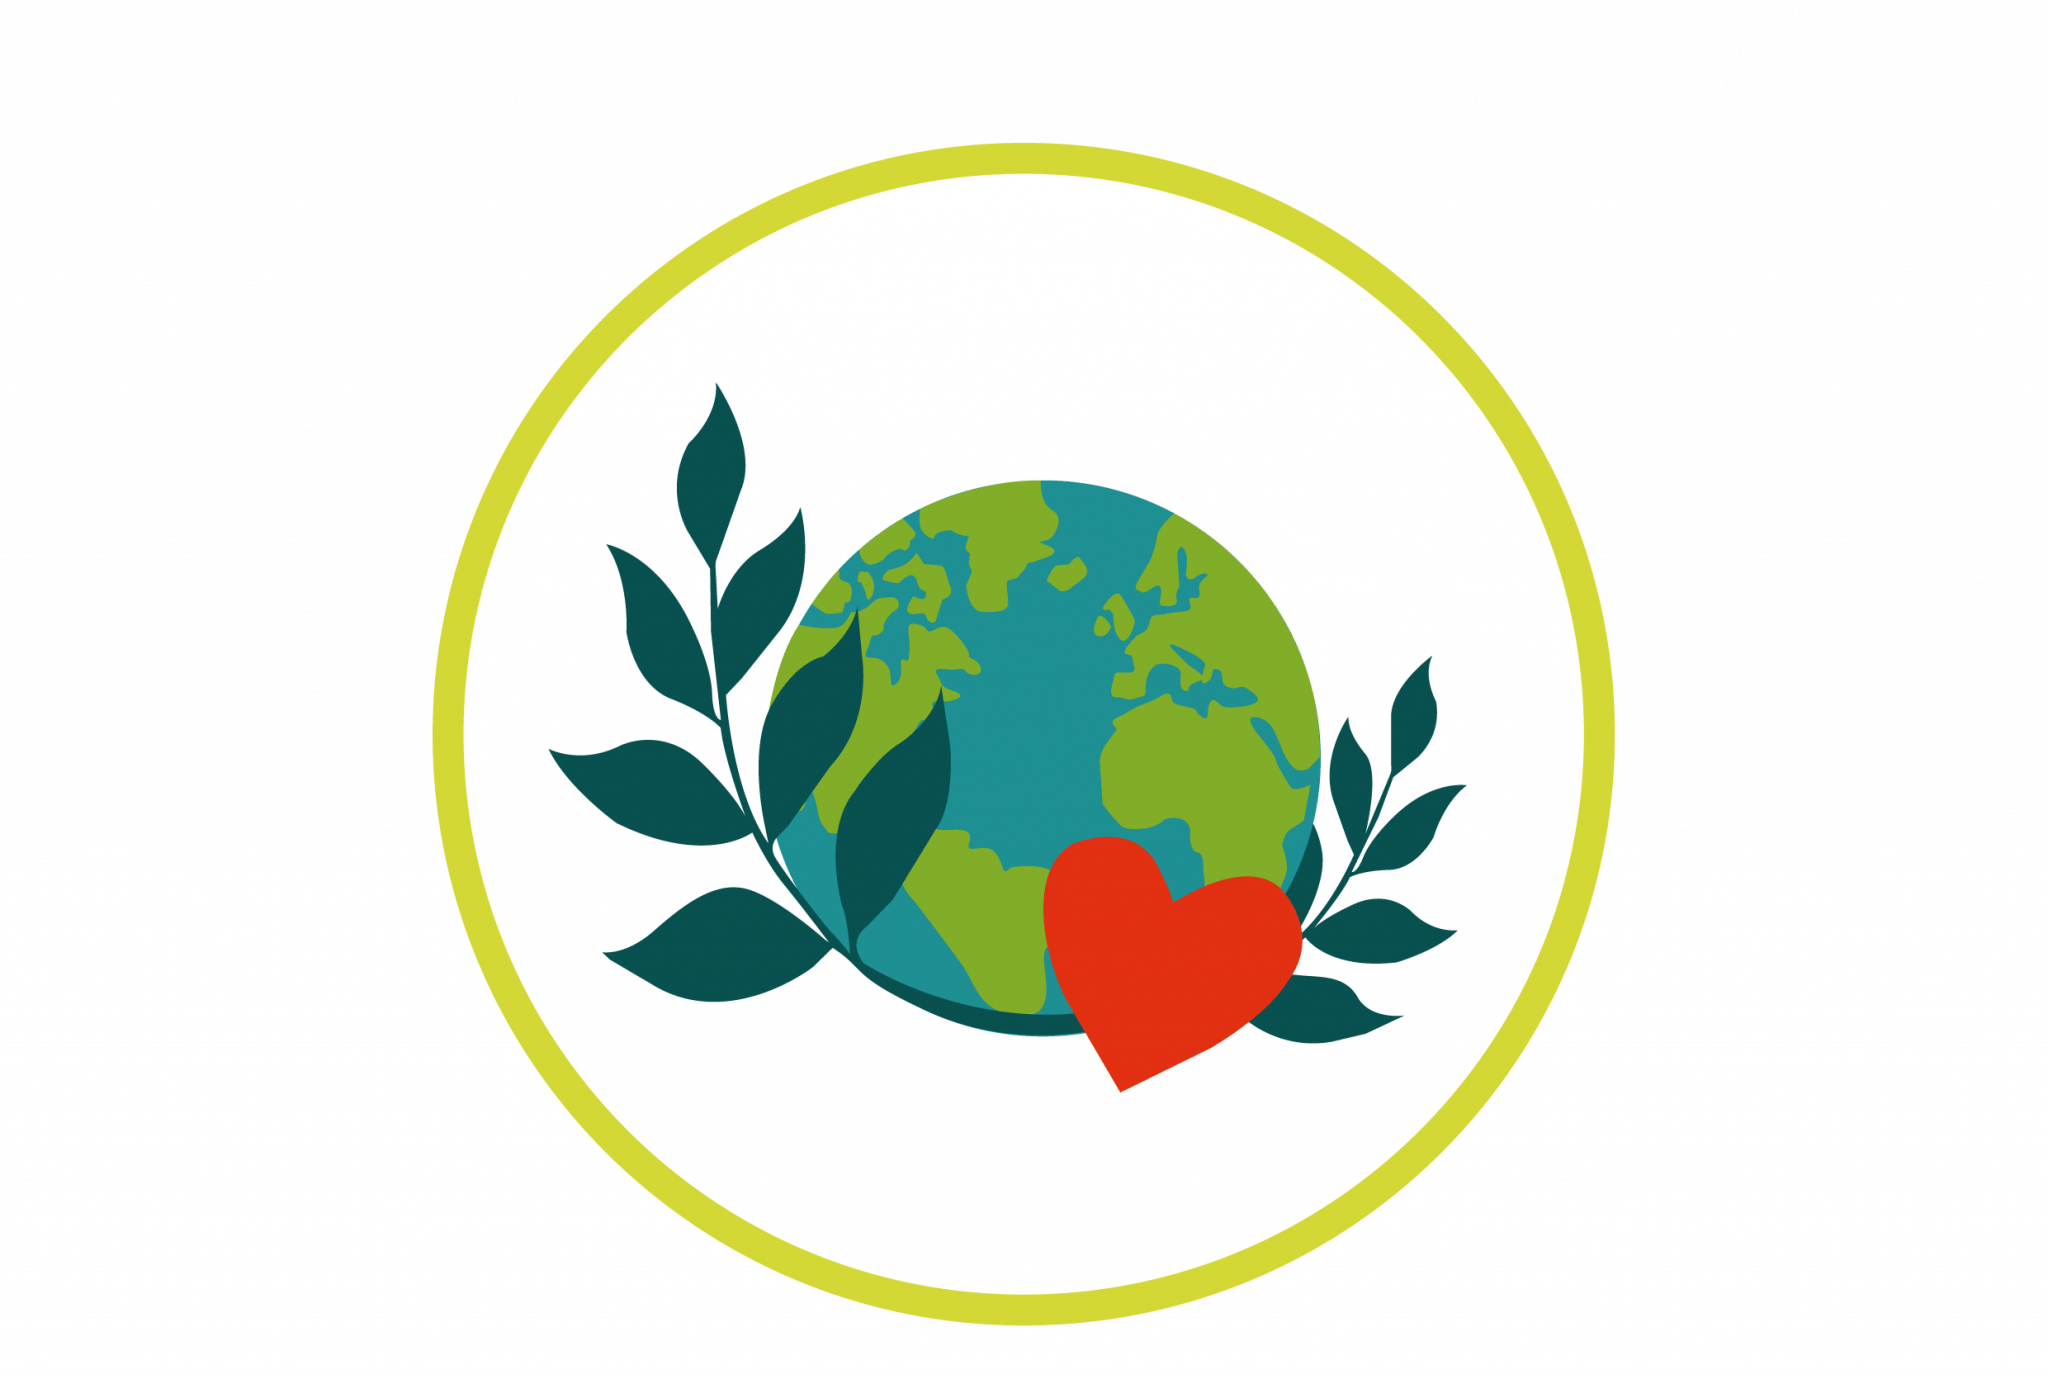 A logo with the globe, leaves and a heart.